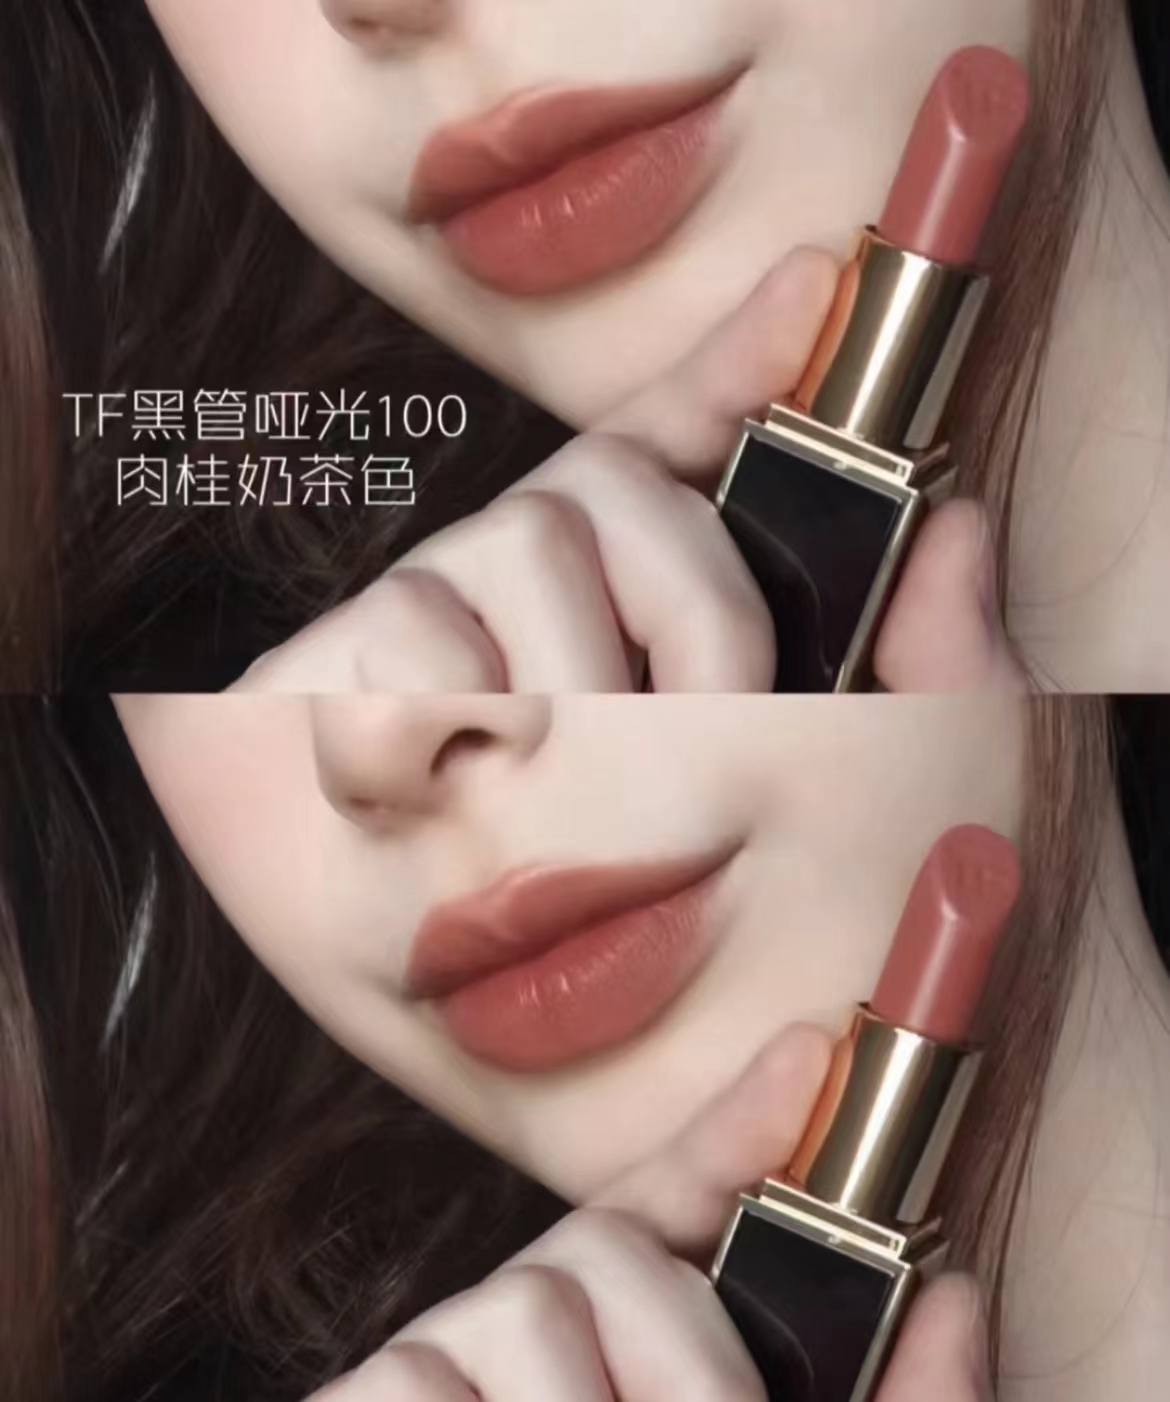 Tom Ford Lips - Best Price in Singapore - Mar 2023 